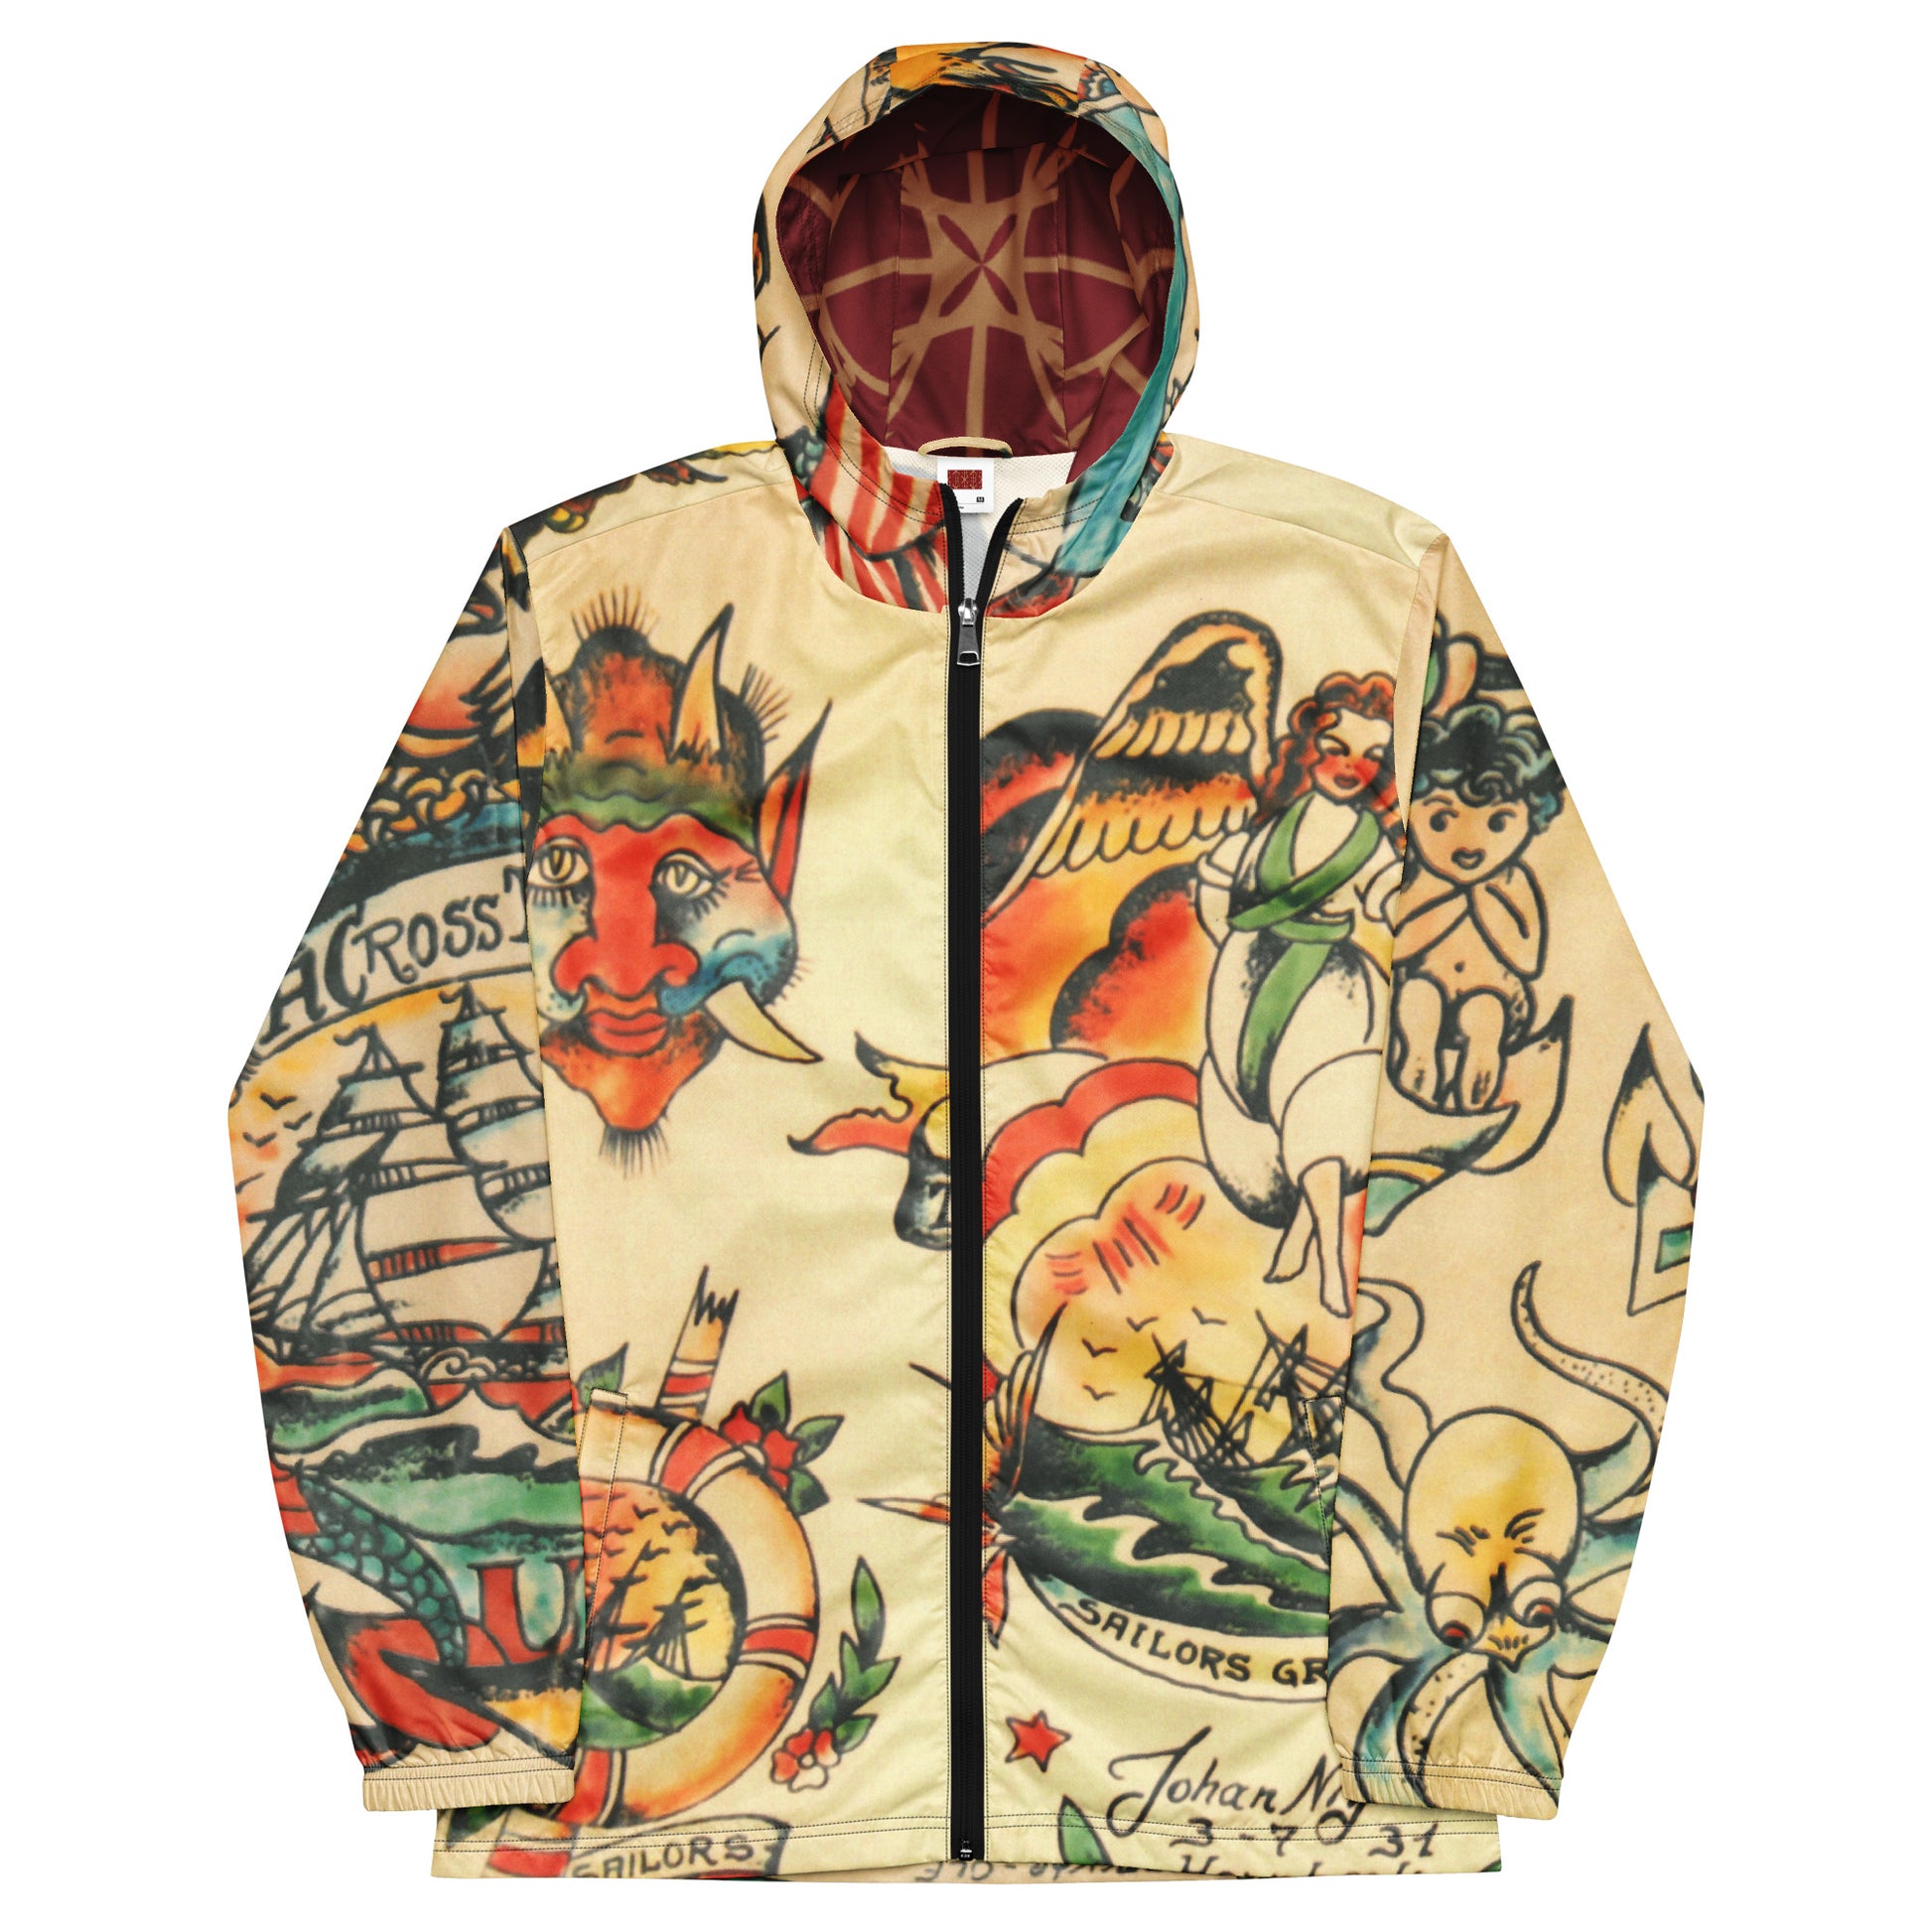 Men’s windbreaker with unique tattoo art design by Tattoo Ole front